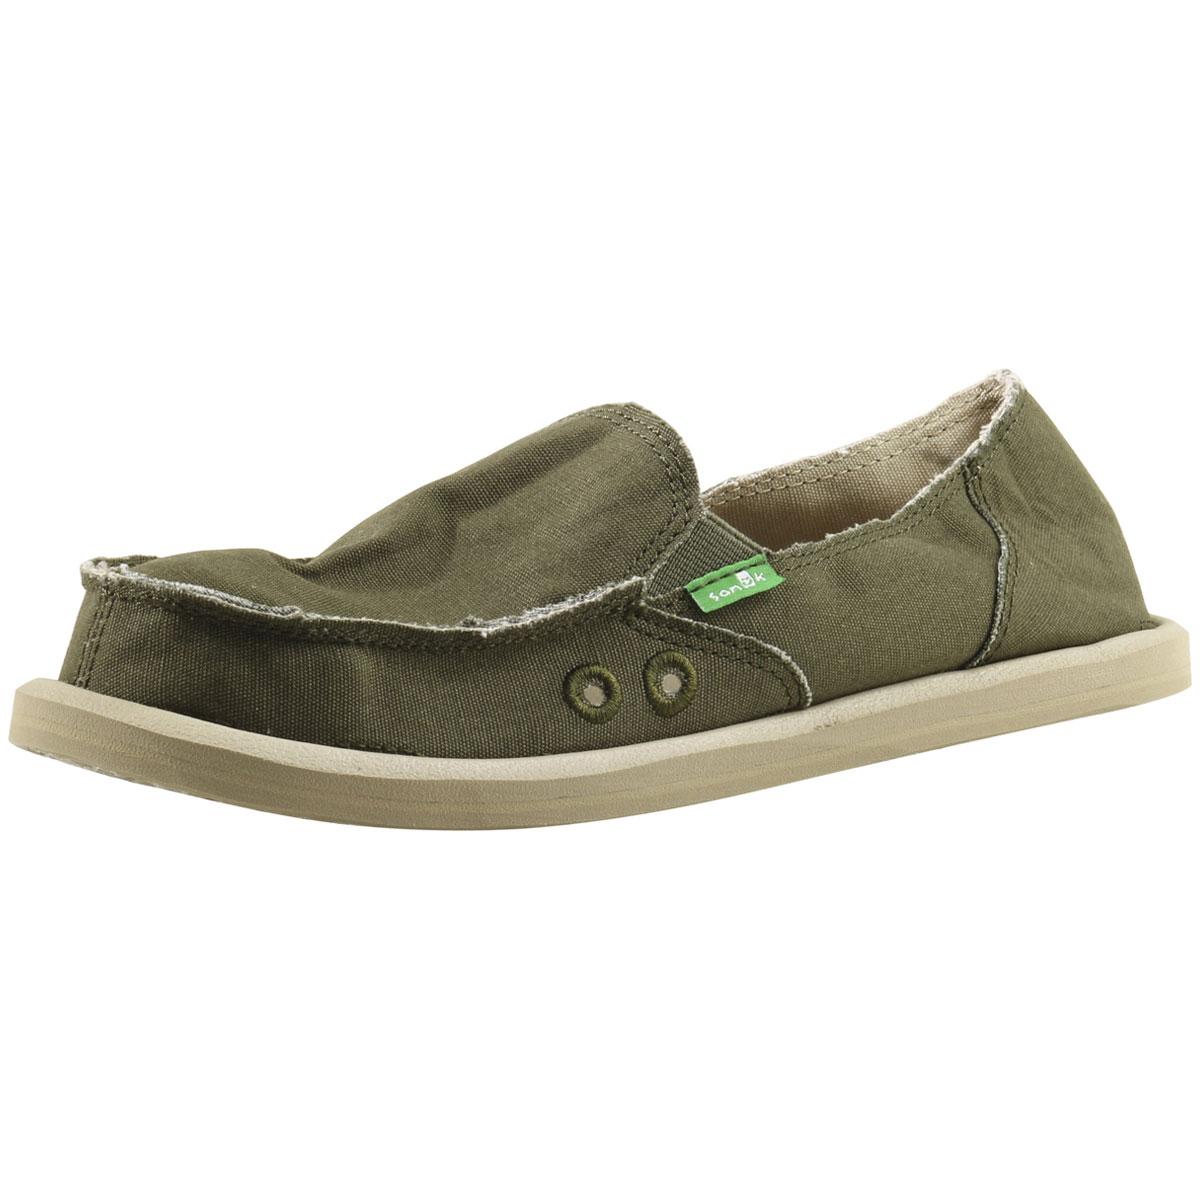 Sanuk Women's Donna Daily Sidewalk Surfer Loafers Shoes - Dark Olive - 8 B(M) US -  Donna Daily; 1018950